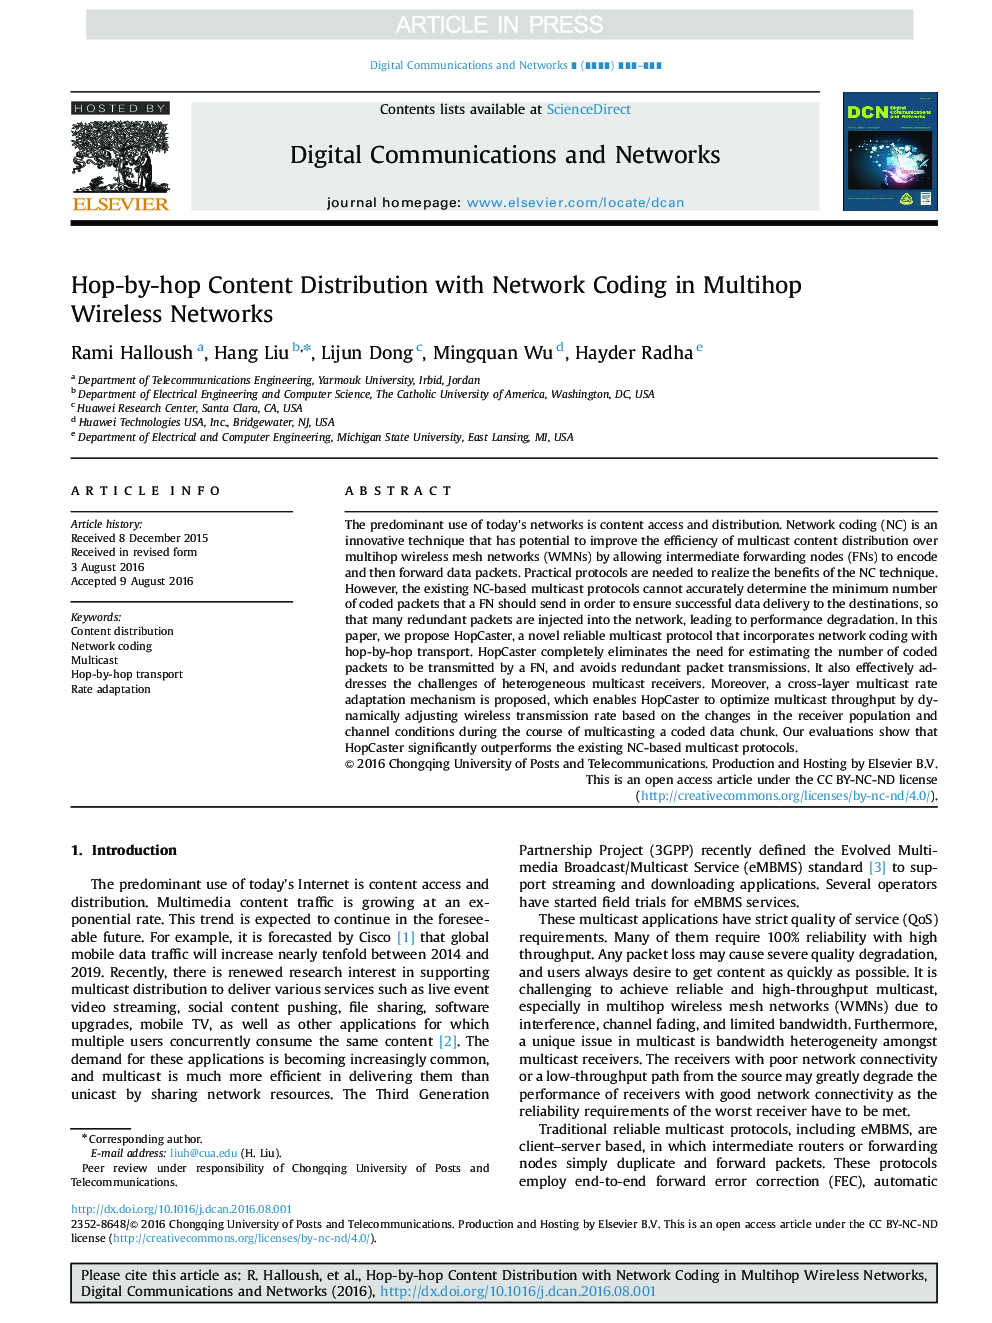 Hop-by-hop Content Distribution with Network Coding in Multihop Wireless Networks